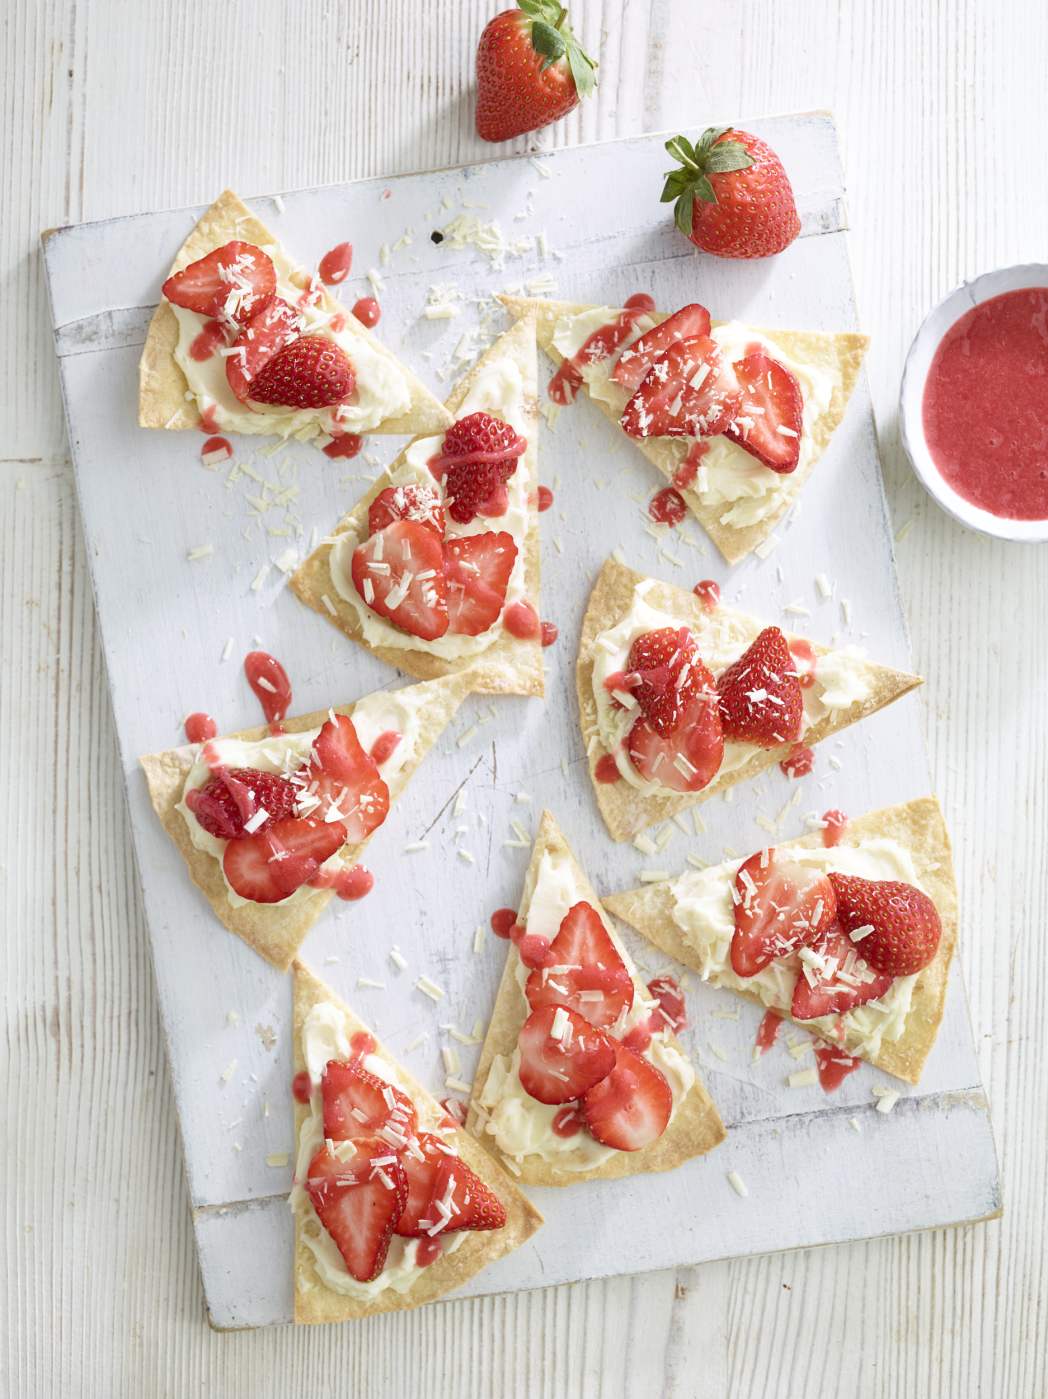 Image for blog - 7 Sumptuous Strawberry Recipes to Enjoy this Summer